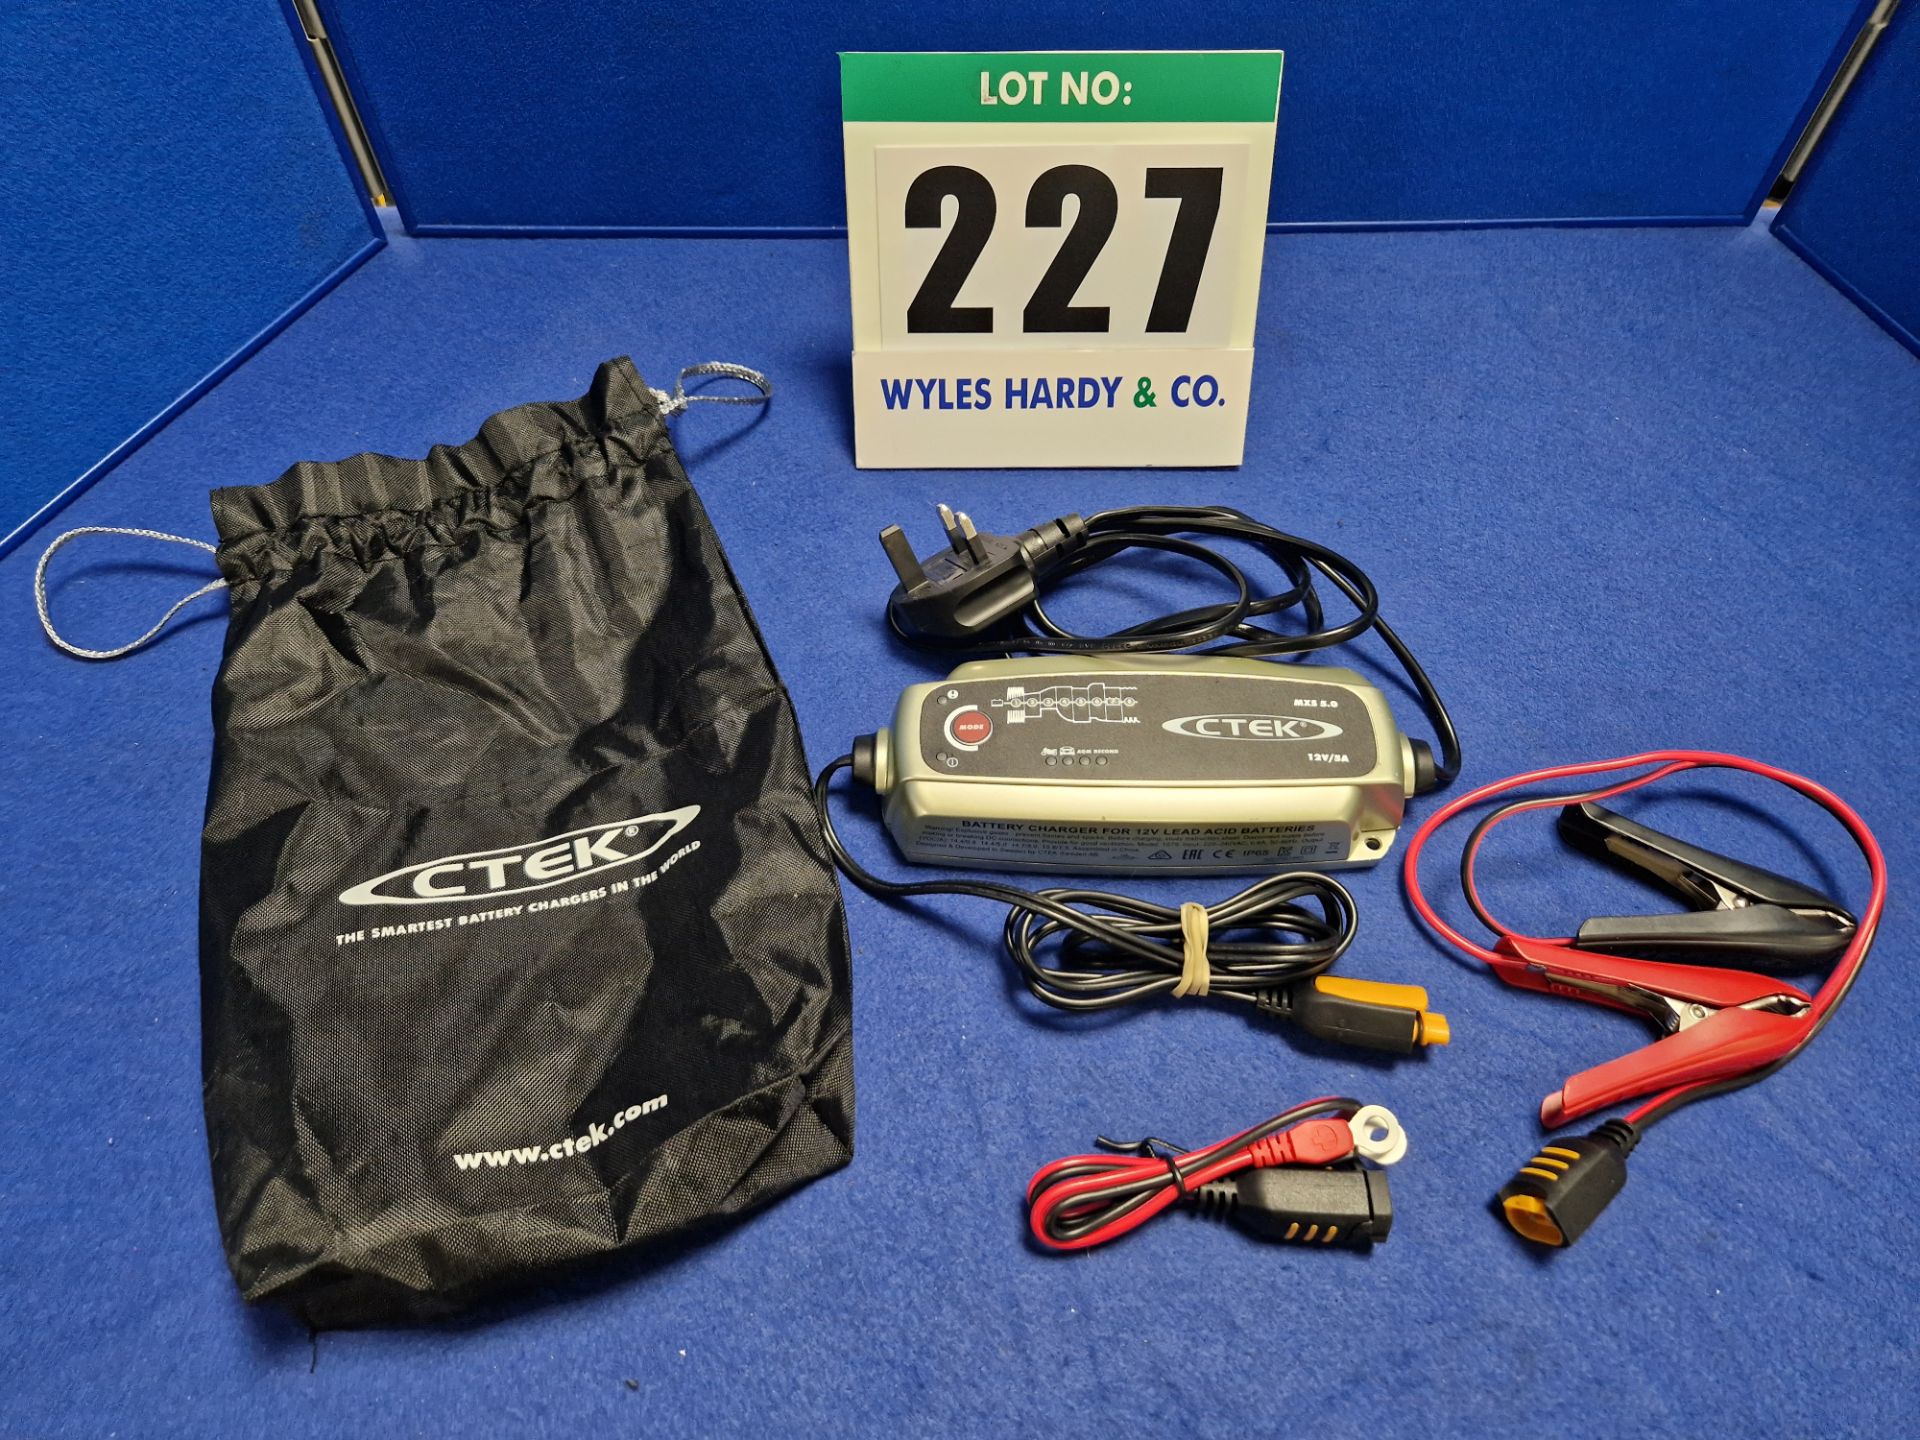 One CTEK Model MXS 5.0 12V 5A Battery Charger/Conditioner with Crocodile Clip Connector Lead and